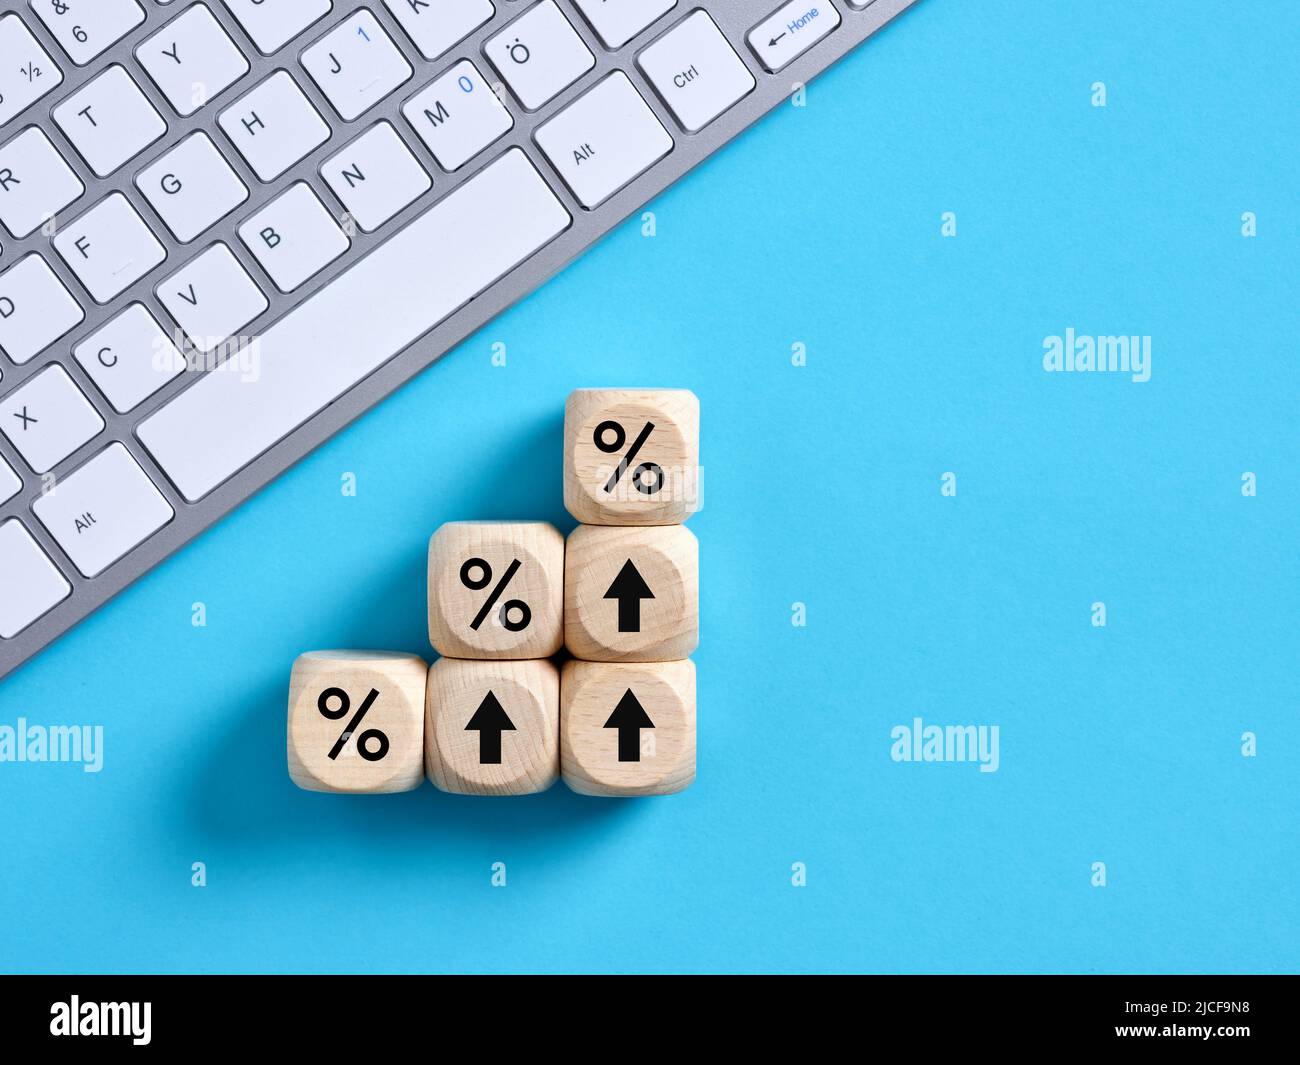 Percent or percentage symbols on wooden cubes. Calculating increasing financial interest rates or mortgage rates concept. Stock Photo